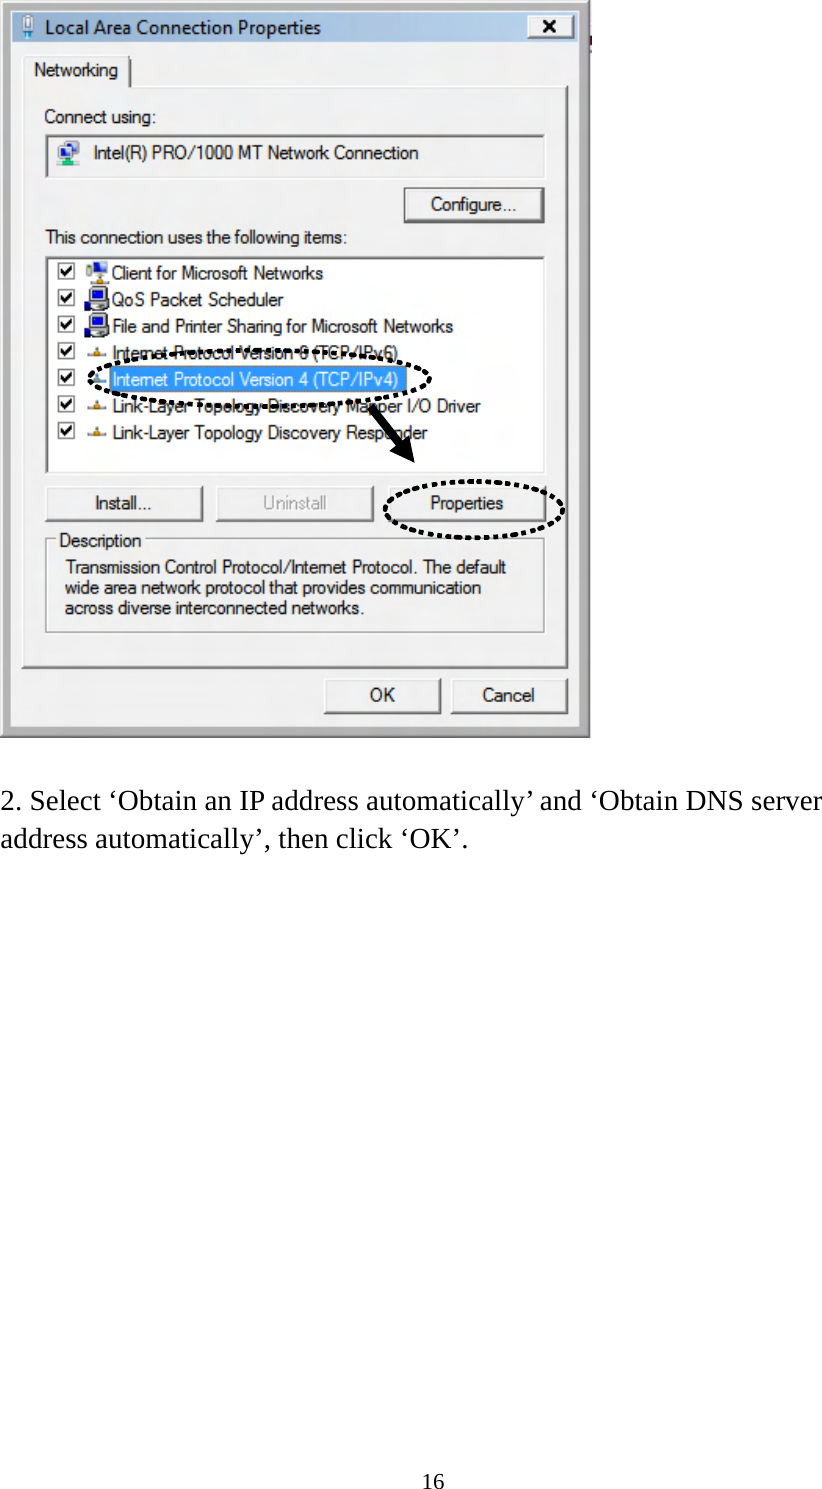 16   2. Select ‘Obtain an IP address automatically’ and ‘Obtain DNS server address automatically’, then click ‘OK’.  